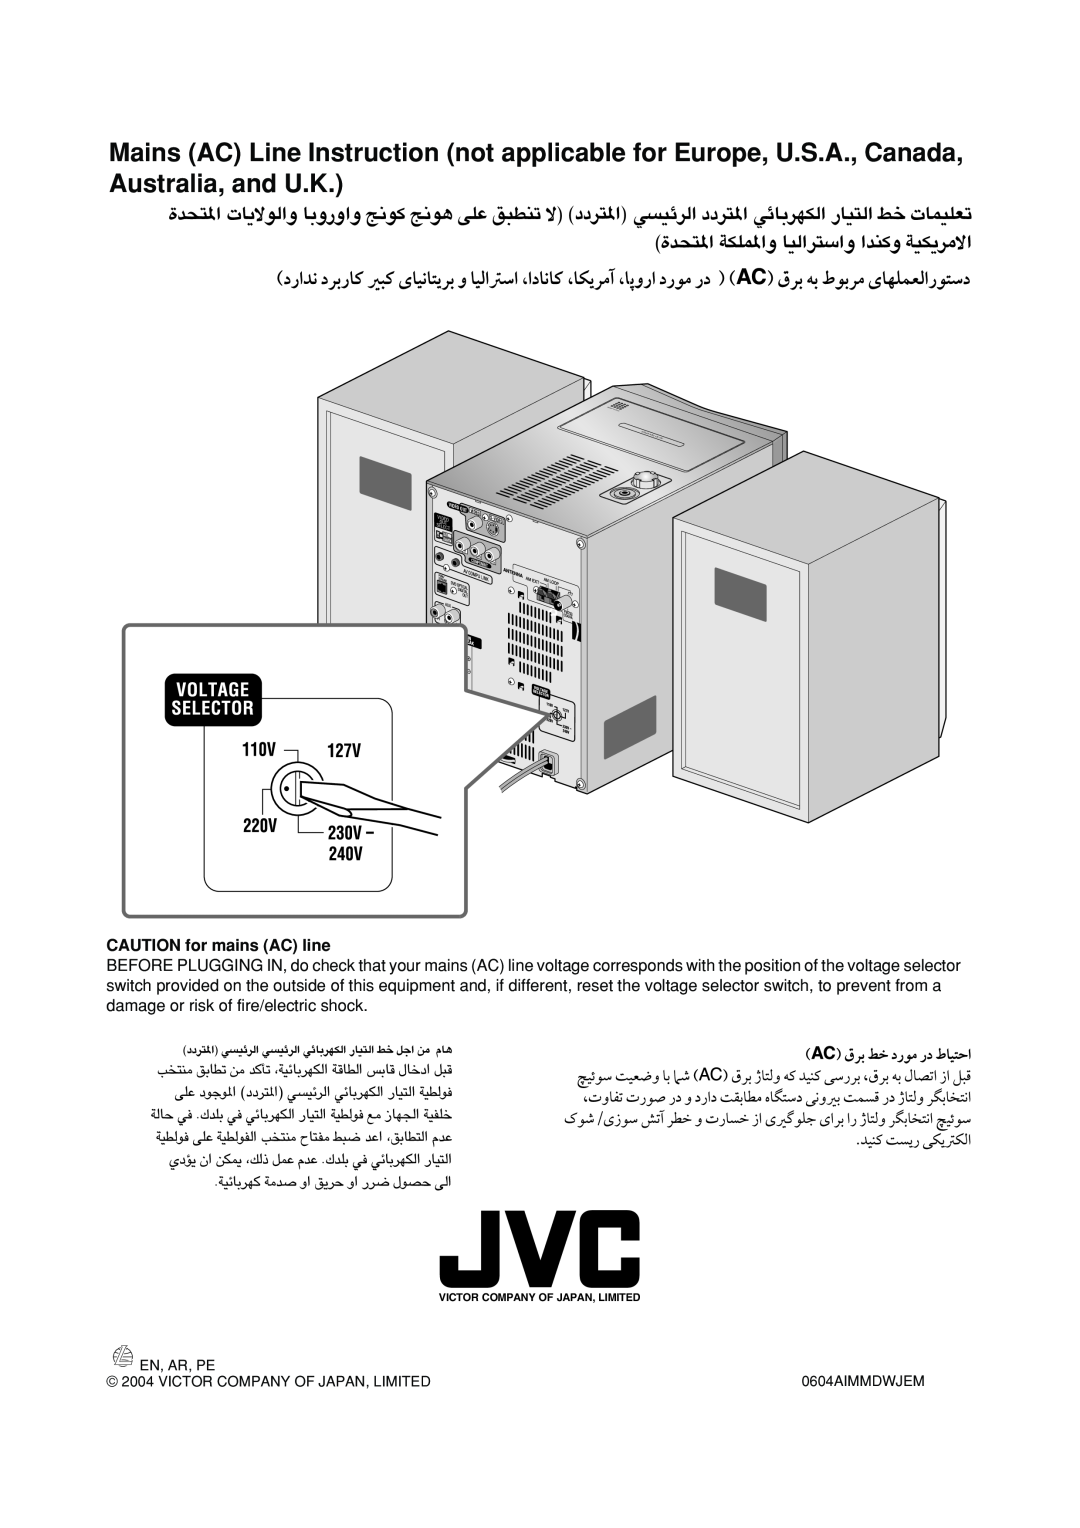 JVC UX-P450 manual CAUTION for mains AC line, En, Ar, Pe, 0604AIMMDWJEM, Victor Company Of Japan, Limited 